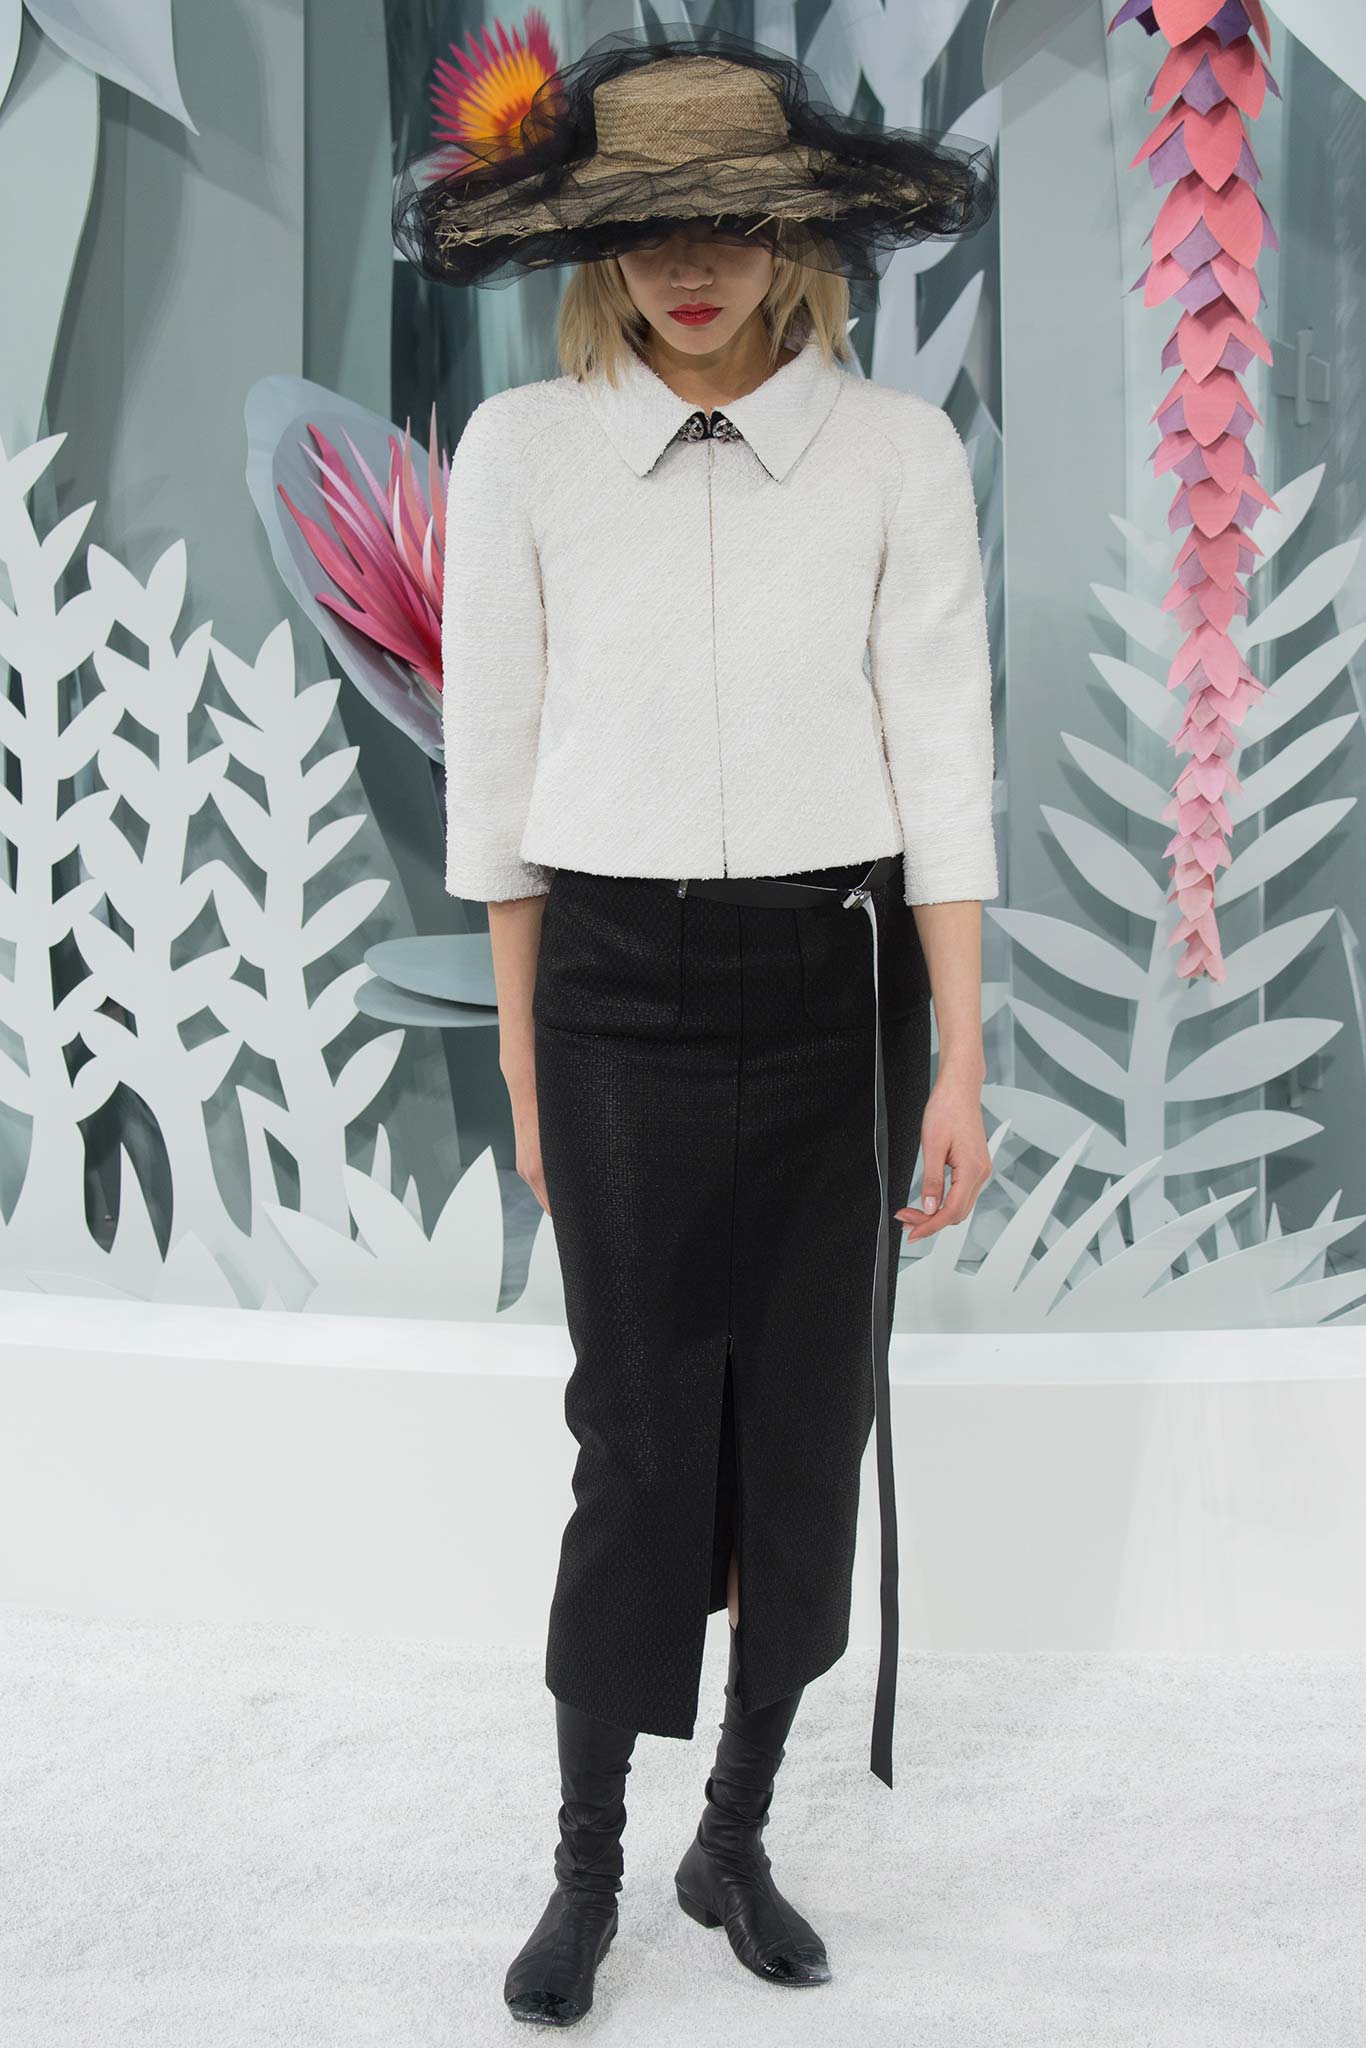 chanel-haute-couture-spring-2015-runway-show08